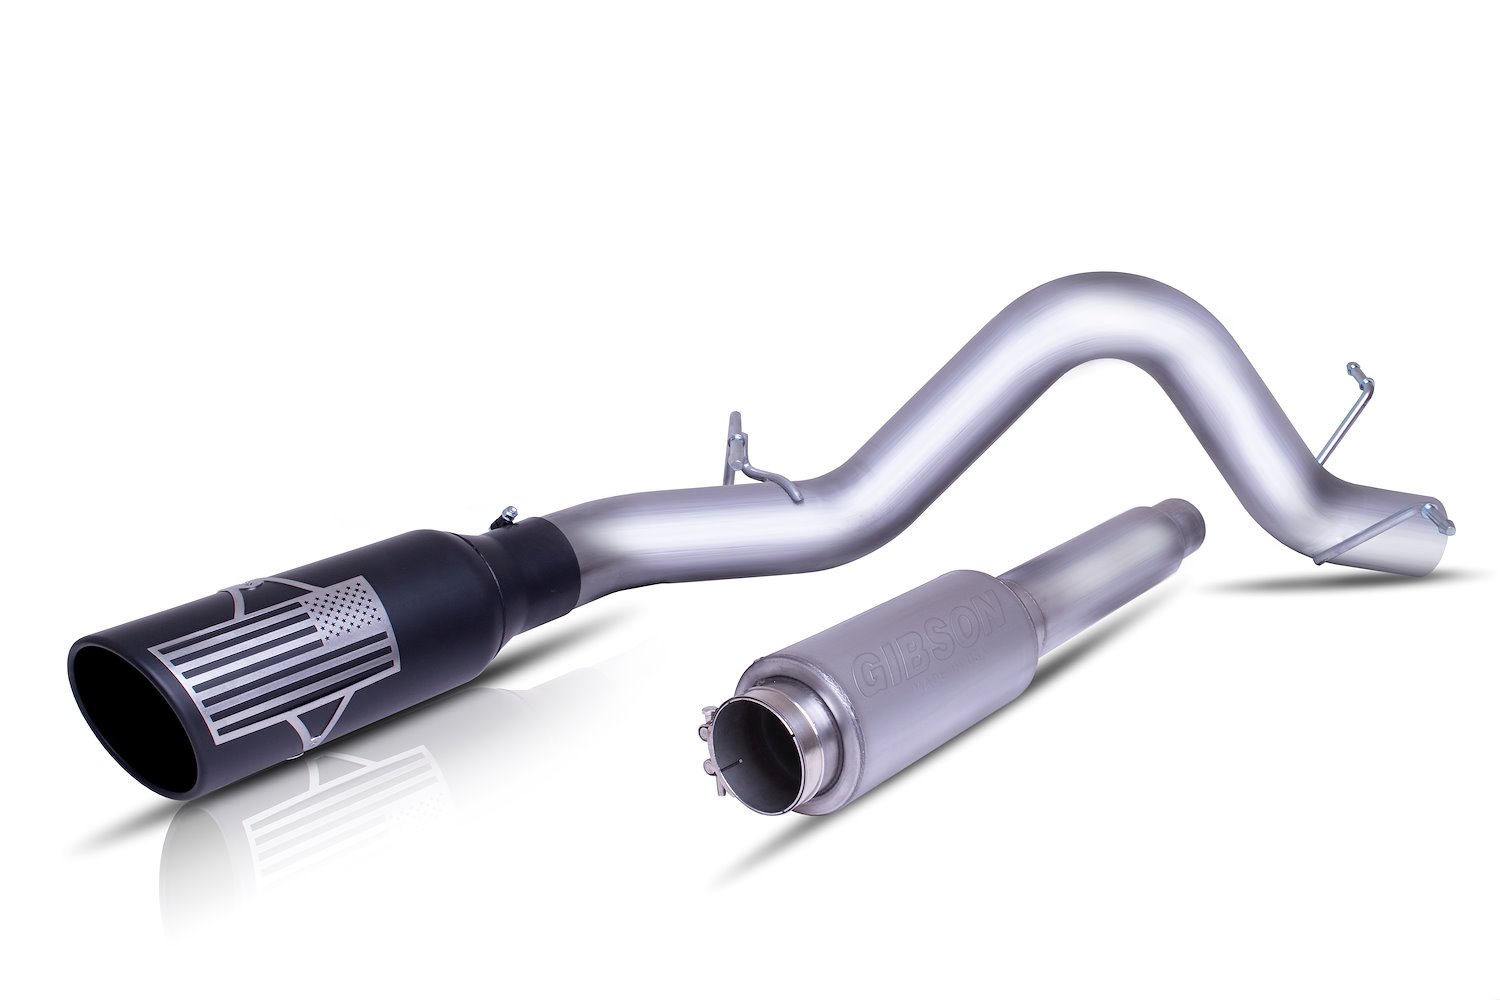 Patriot Series Cat-Back Exhaust System for 2014-Up Chevy Silverado/GMC Sierra 1500